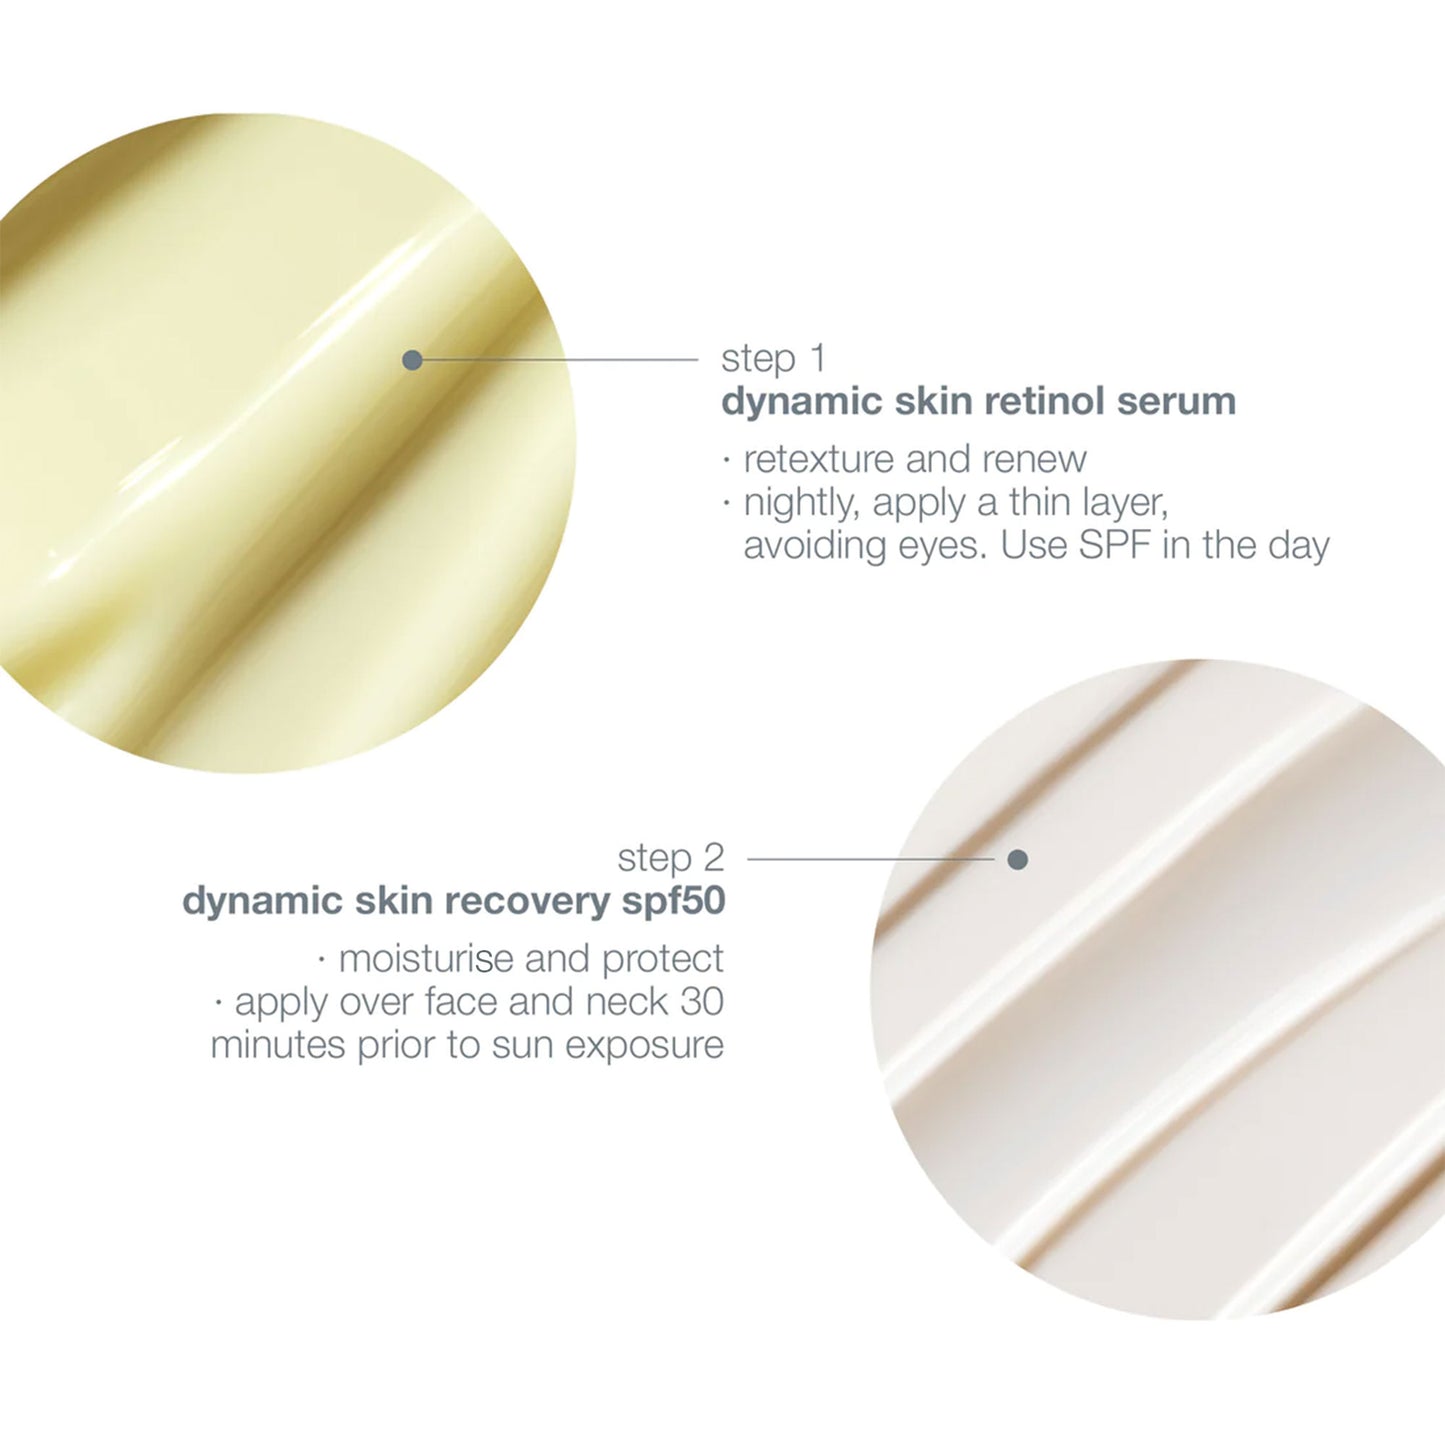 Dynamic Skin Recovery SPF50 Duo (1 full size + 1 free travel)